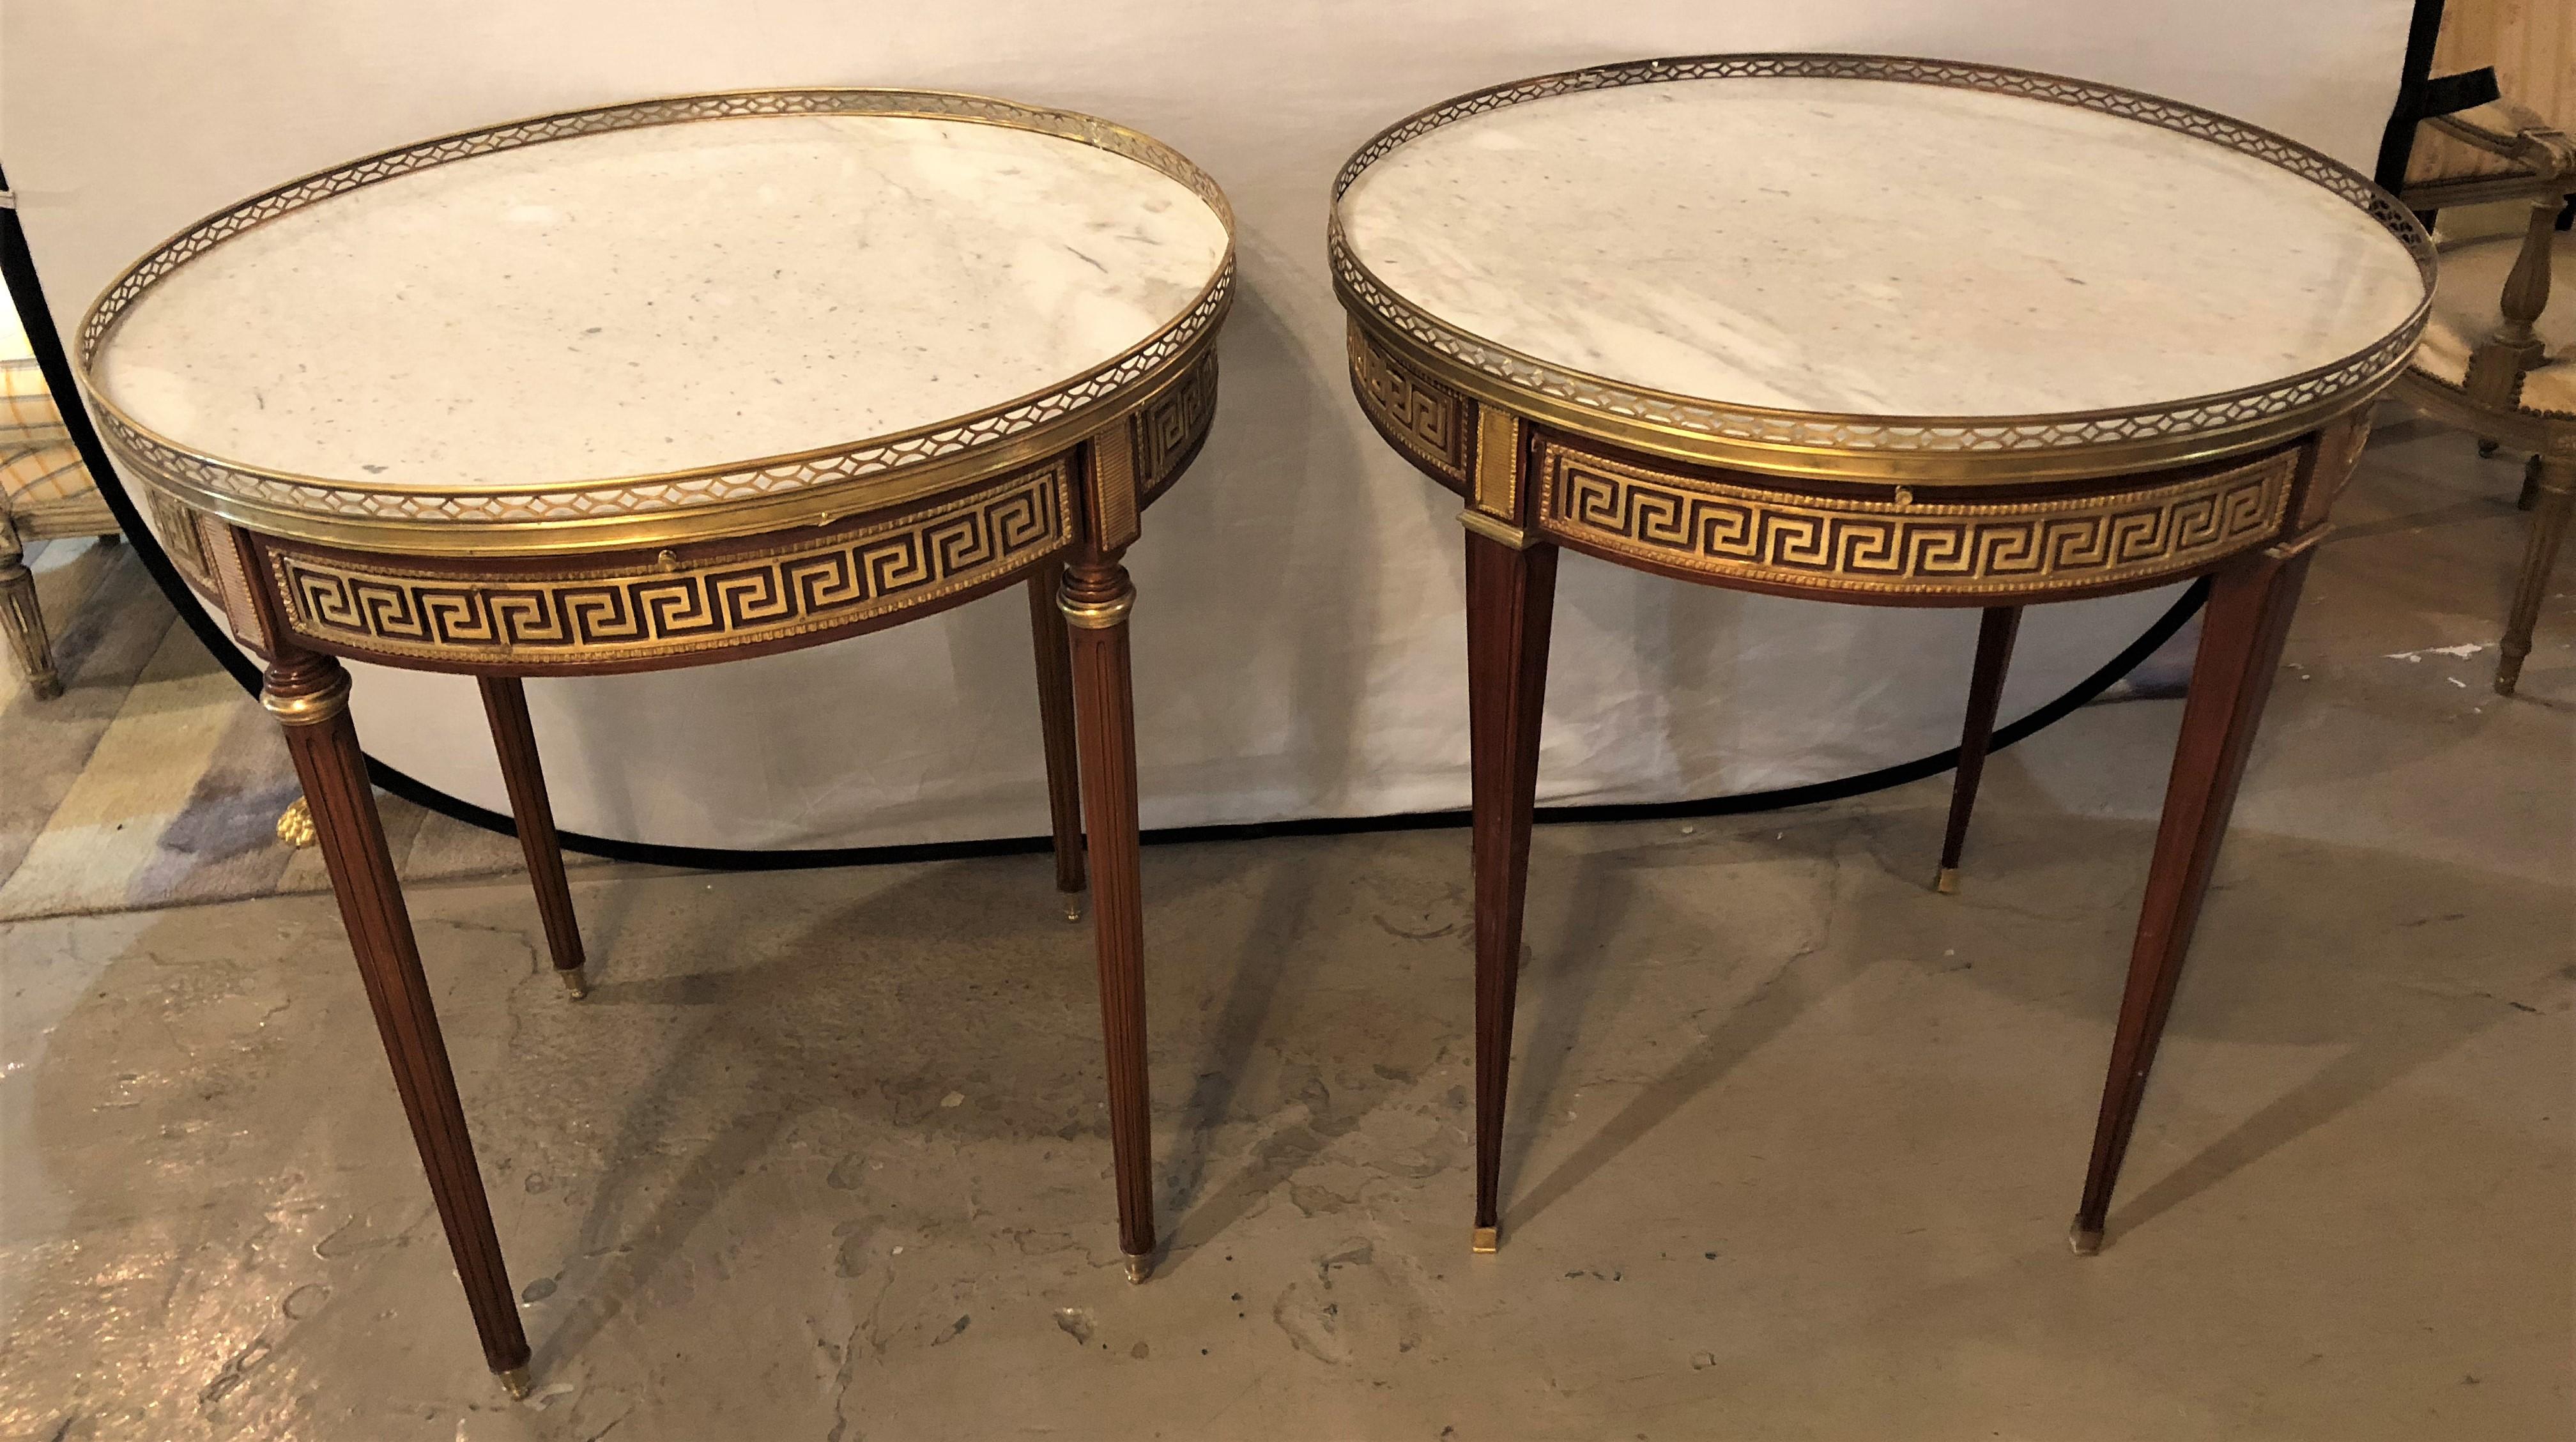 A pair of marble-top Greek key Bouillotte or end tables in mahogany with double drawers and pull-out slides. Each bronze sabot leading to a group of tapering legs terminating in bronze capitals supporting a apron have full Greek key design and